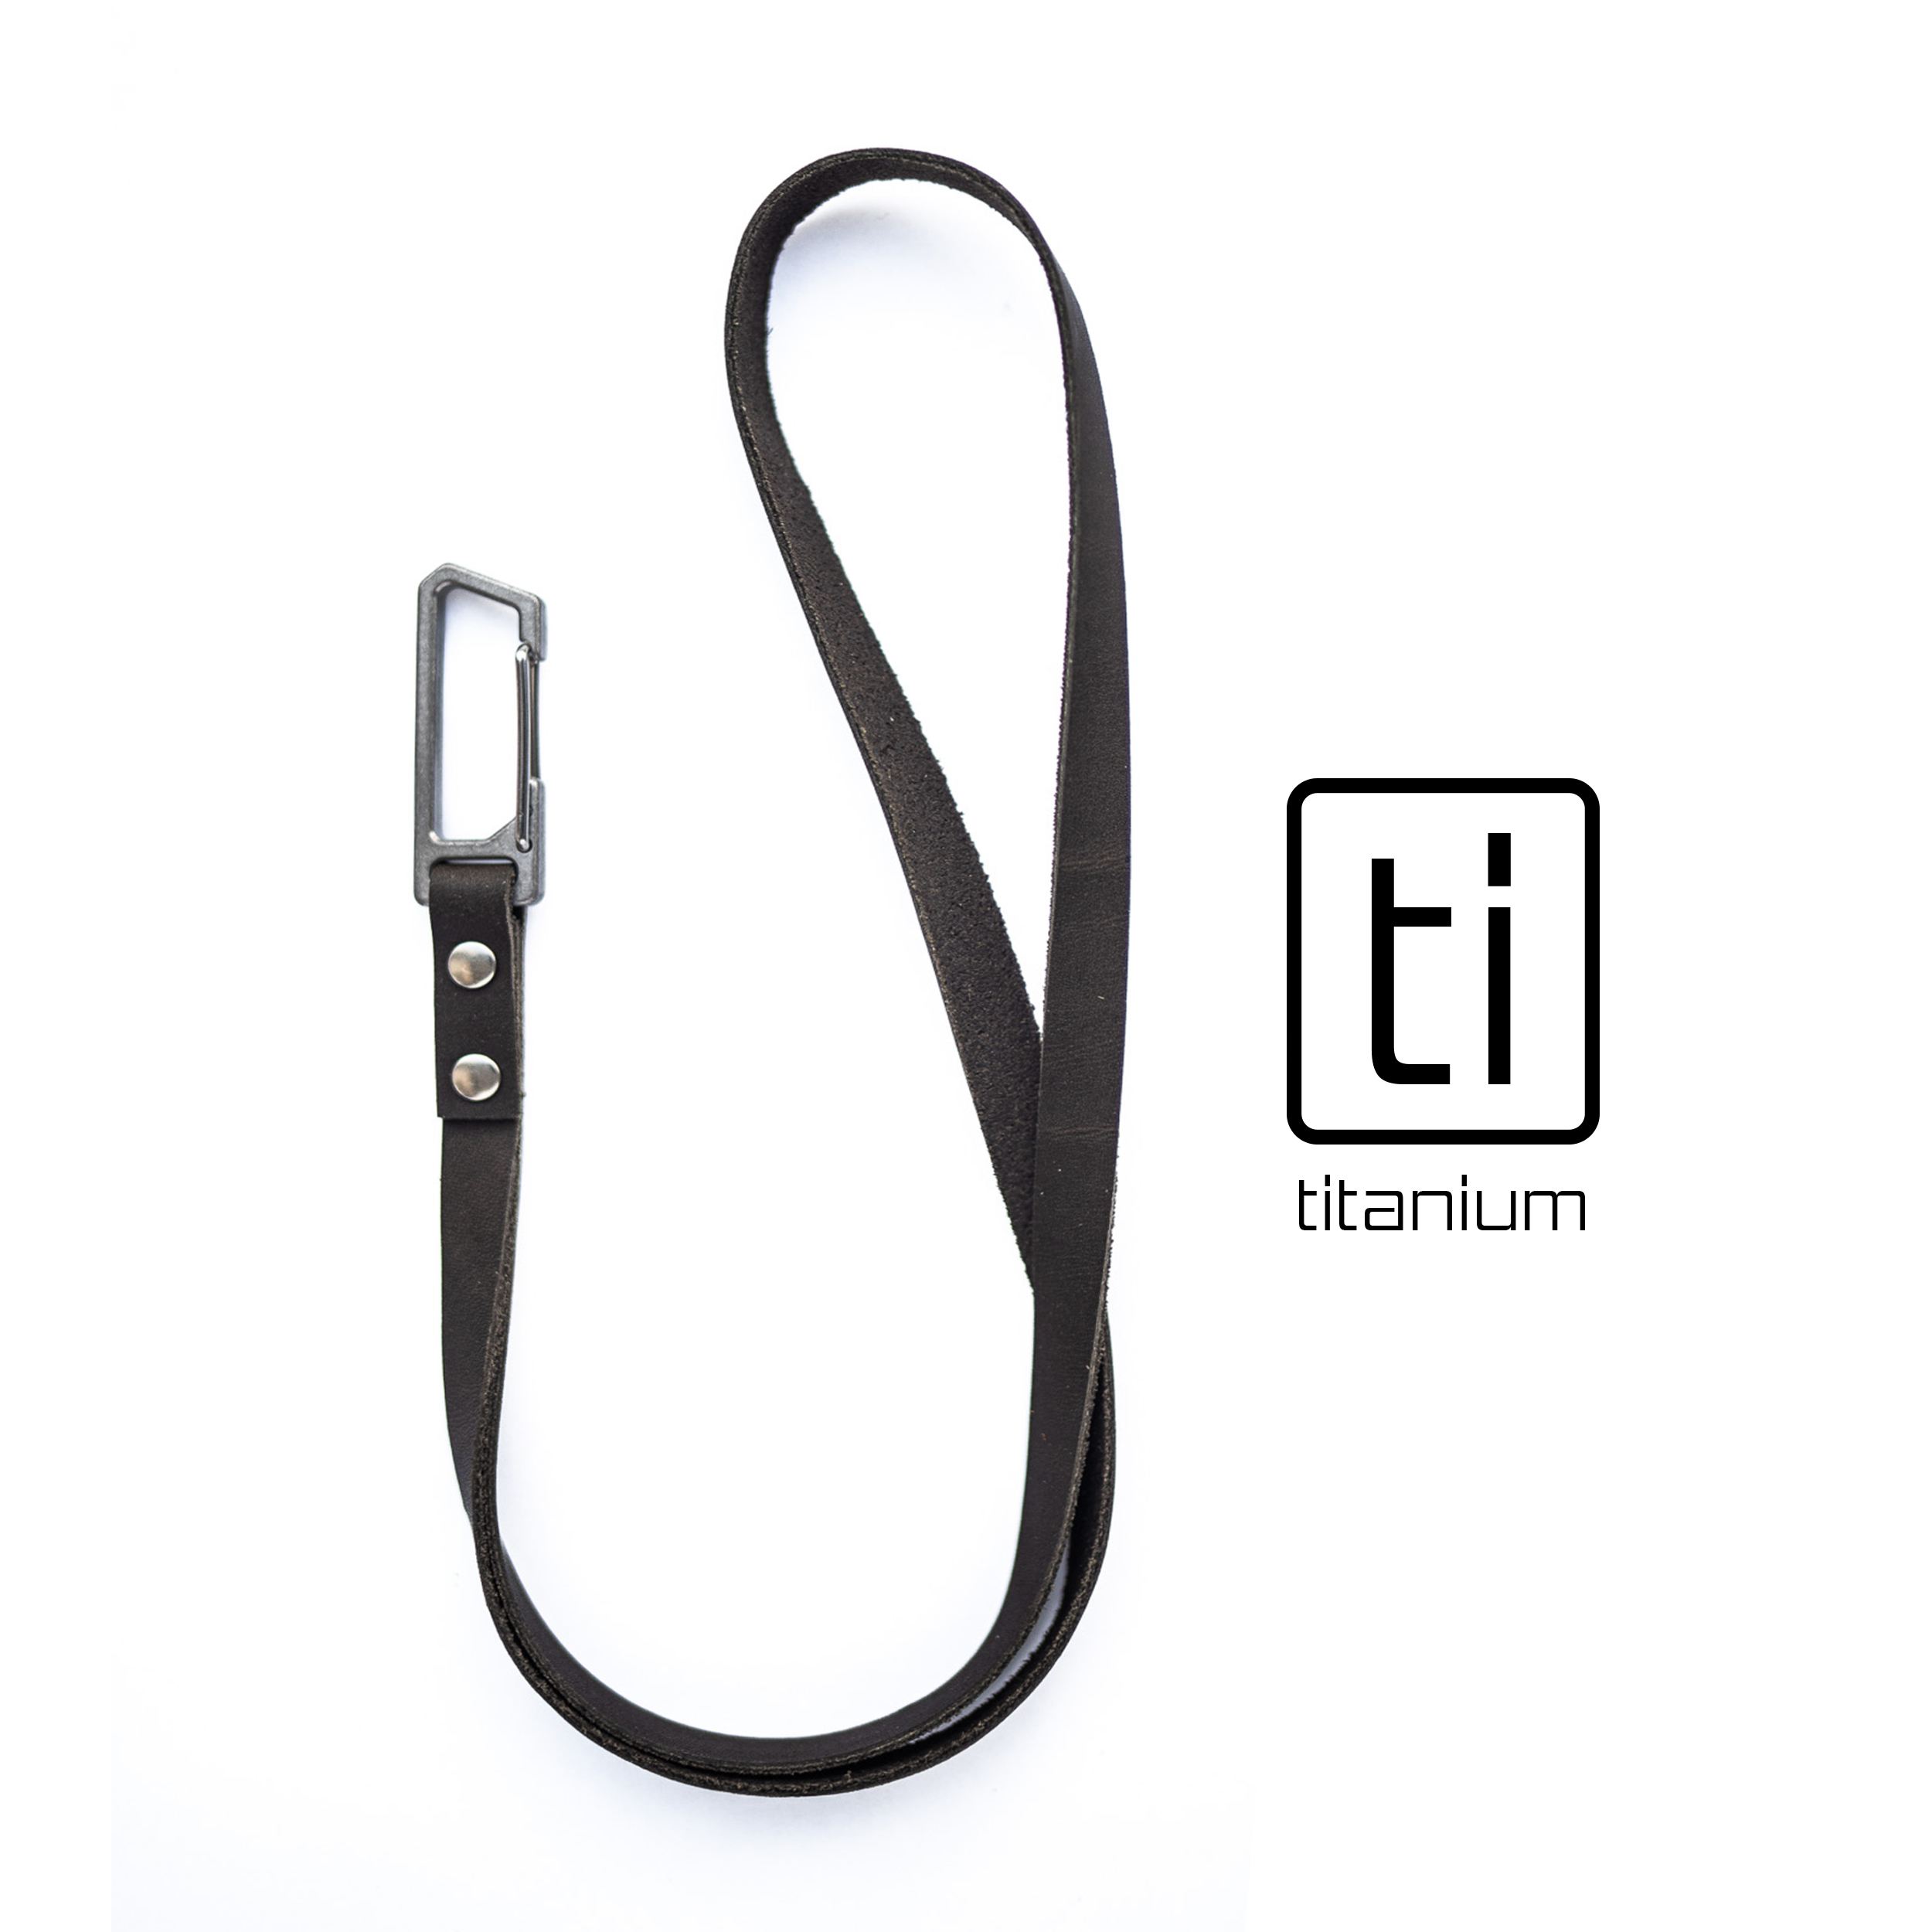 Ash-Black Tirant Latch 17 Leather Neck Lanyard w/Titanium Carabiner for Keys & Accessories (Made in Usa)